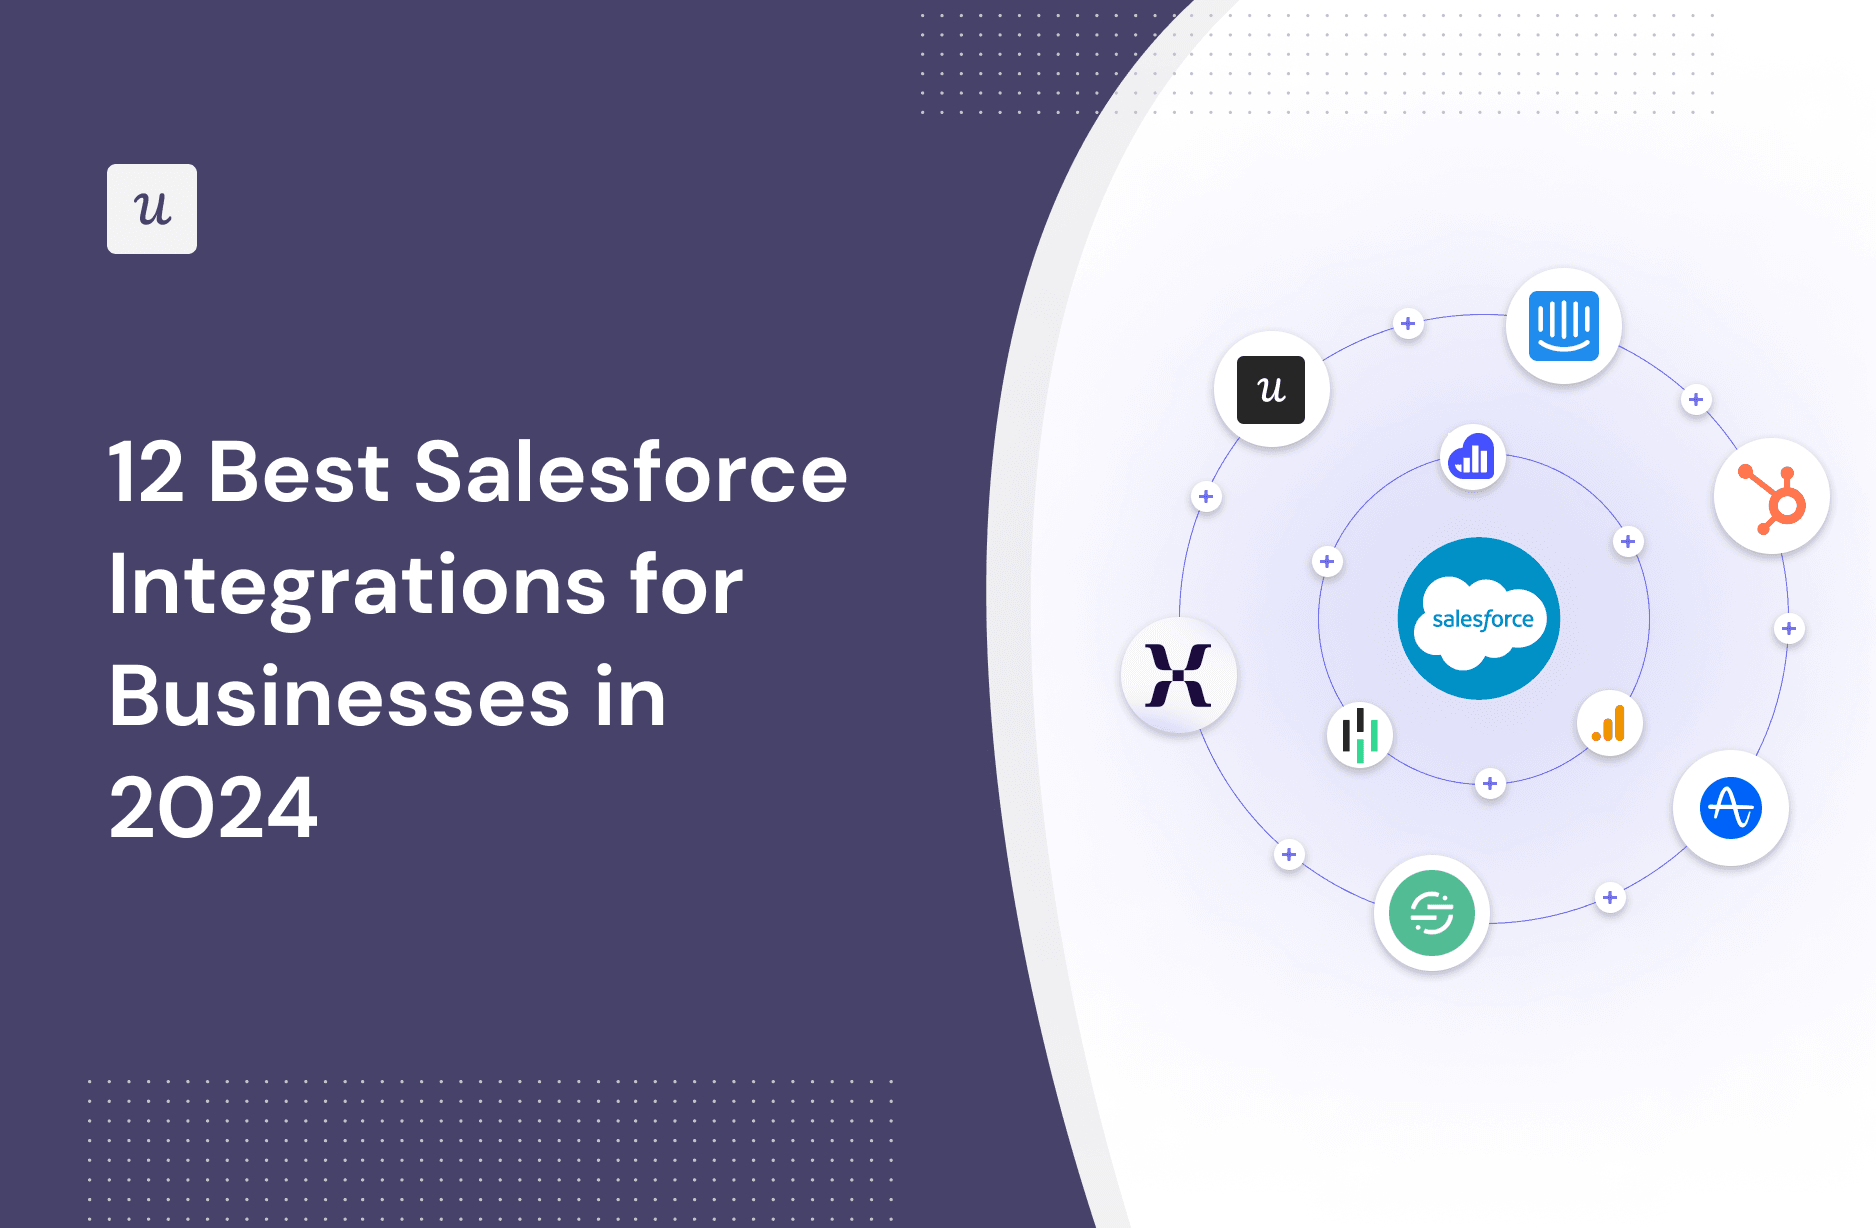 12 Best Salesforce Integrations for Businesses in 2024 cover